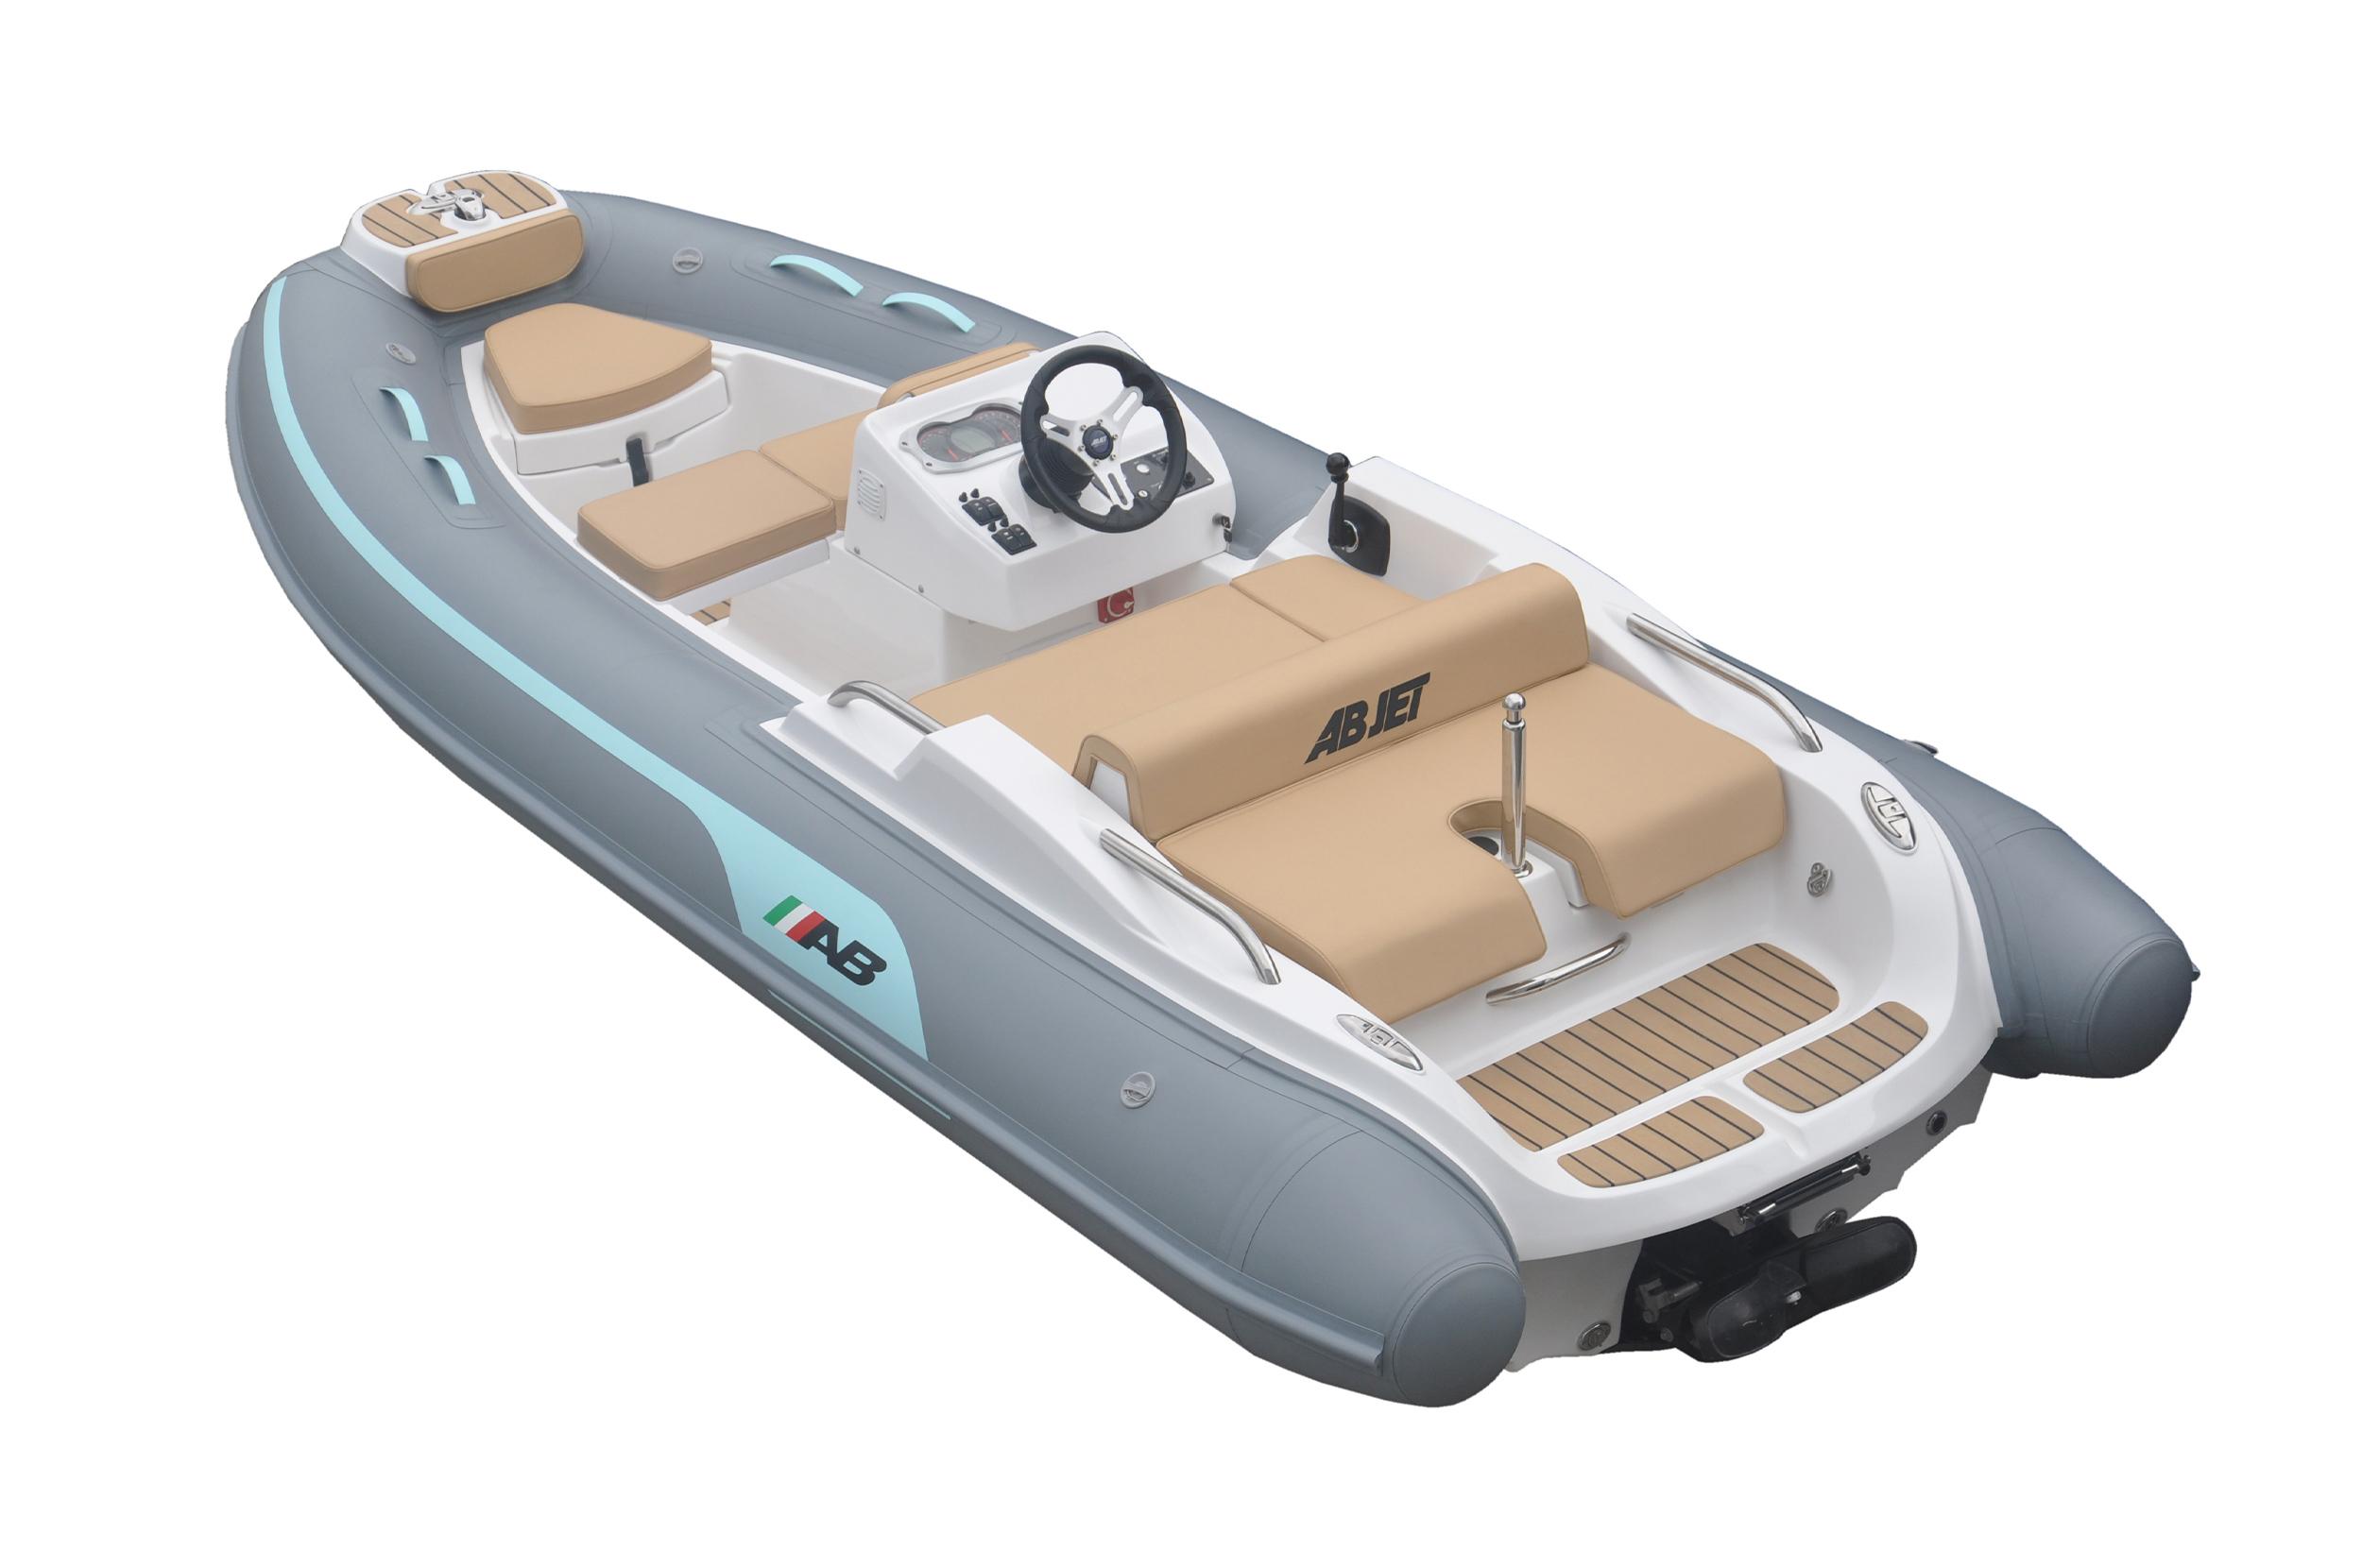 New 2024 AB Inflatables 390XP Jet, 33316 Fort Lauderdale Boat Trader